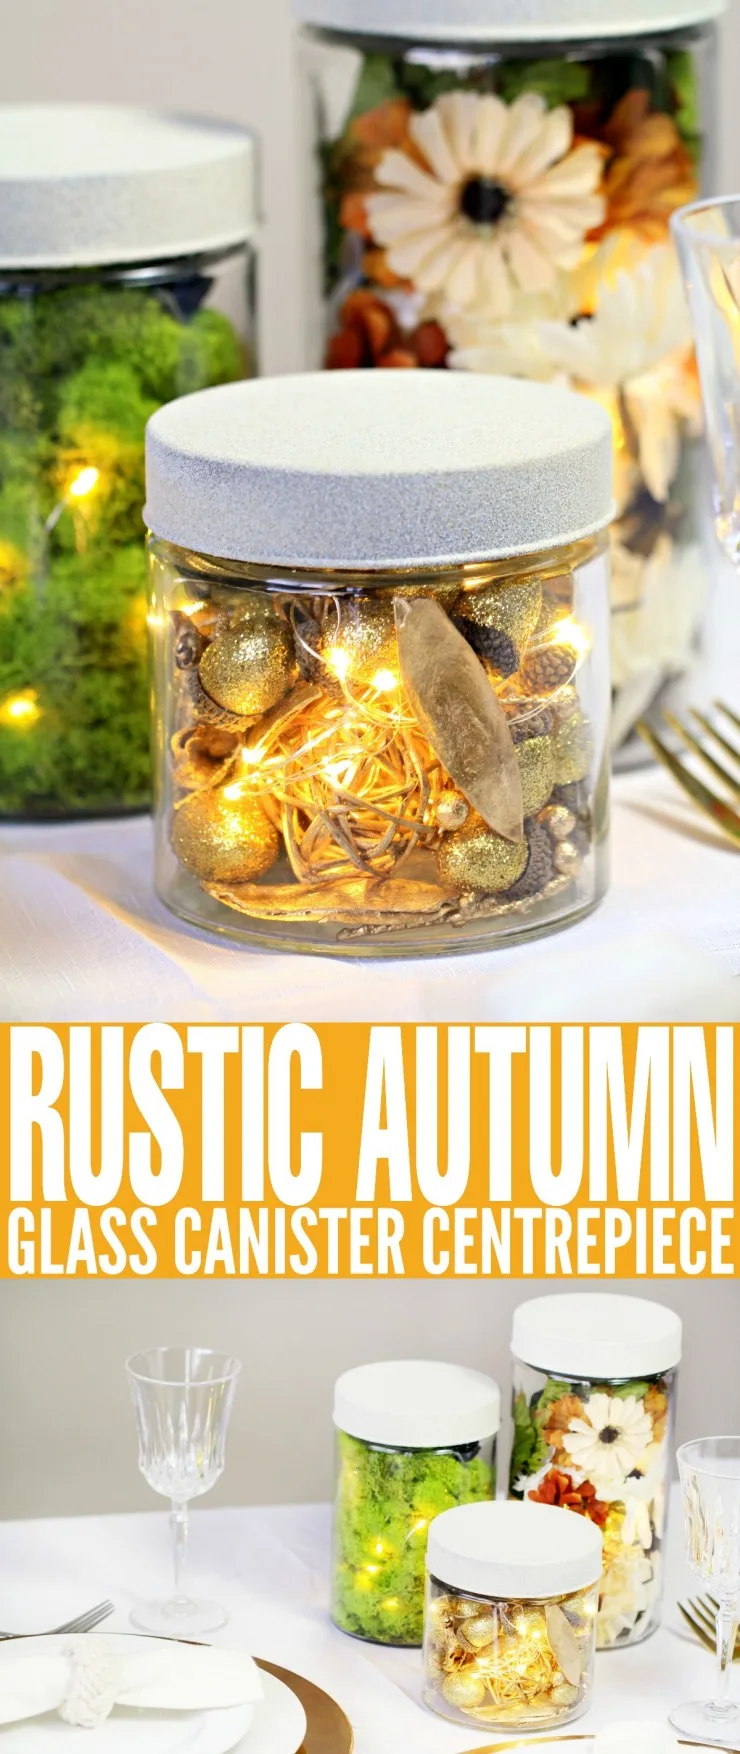 If you’re planning on holding a dinner party this autumn then this Rustic Autumn Glass Canister Centrepiece is the perfect way to embrace the changing seasons and celebrate the natural beauty of fall.